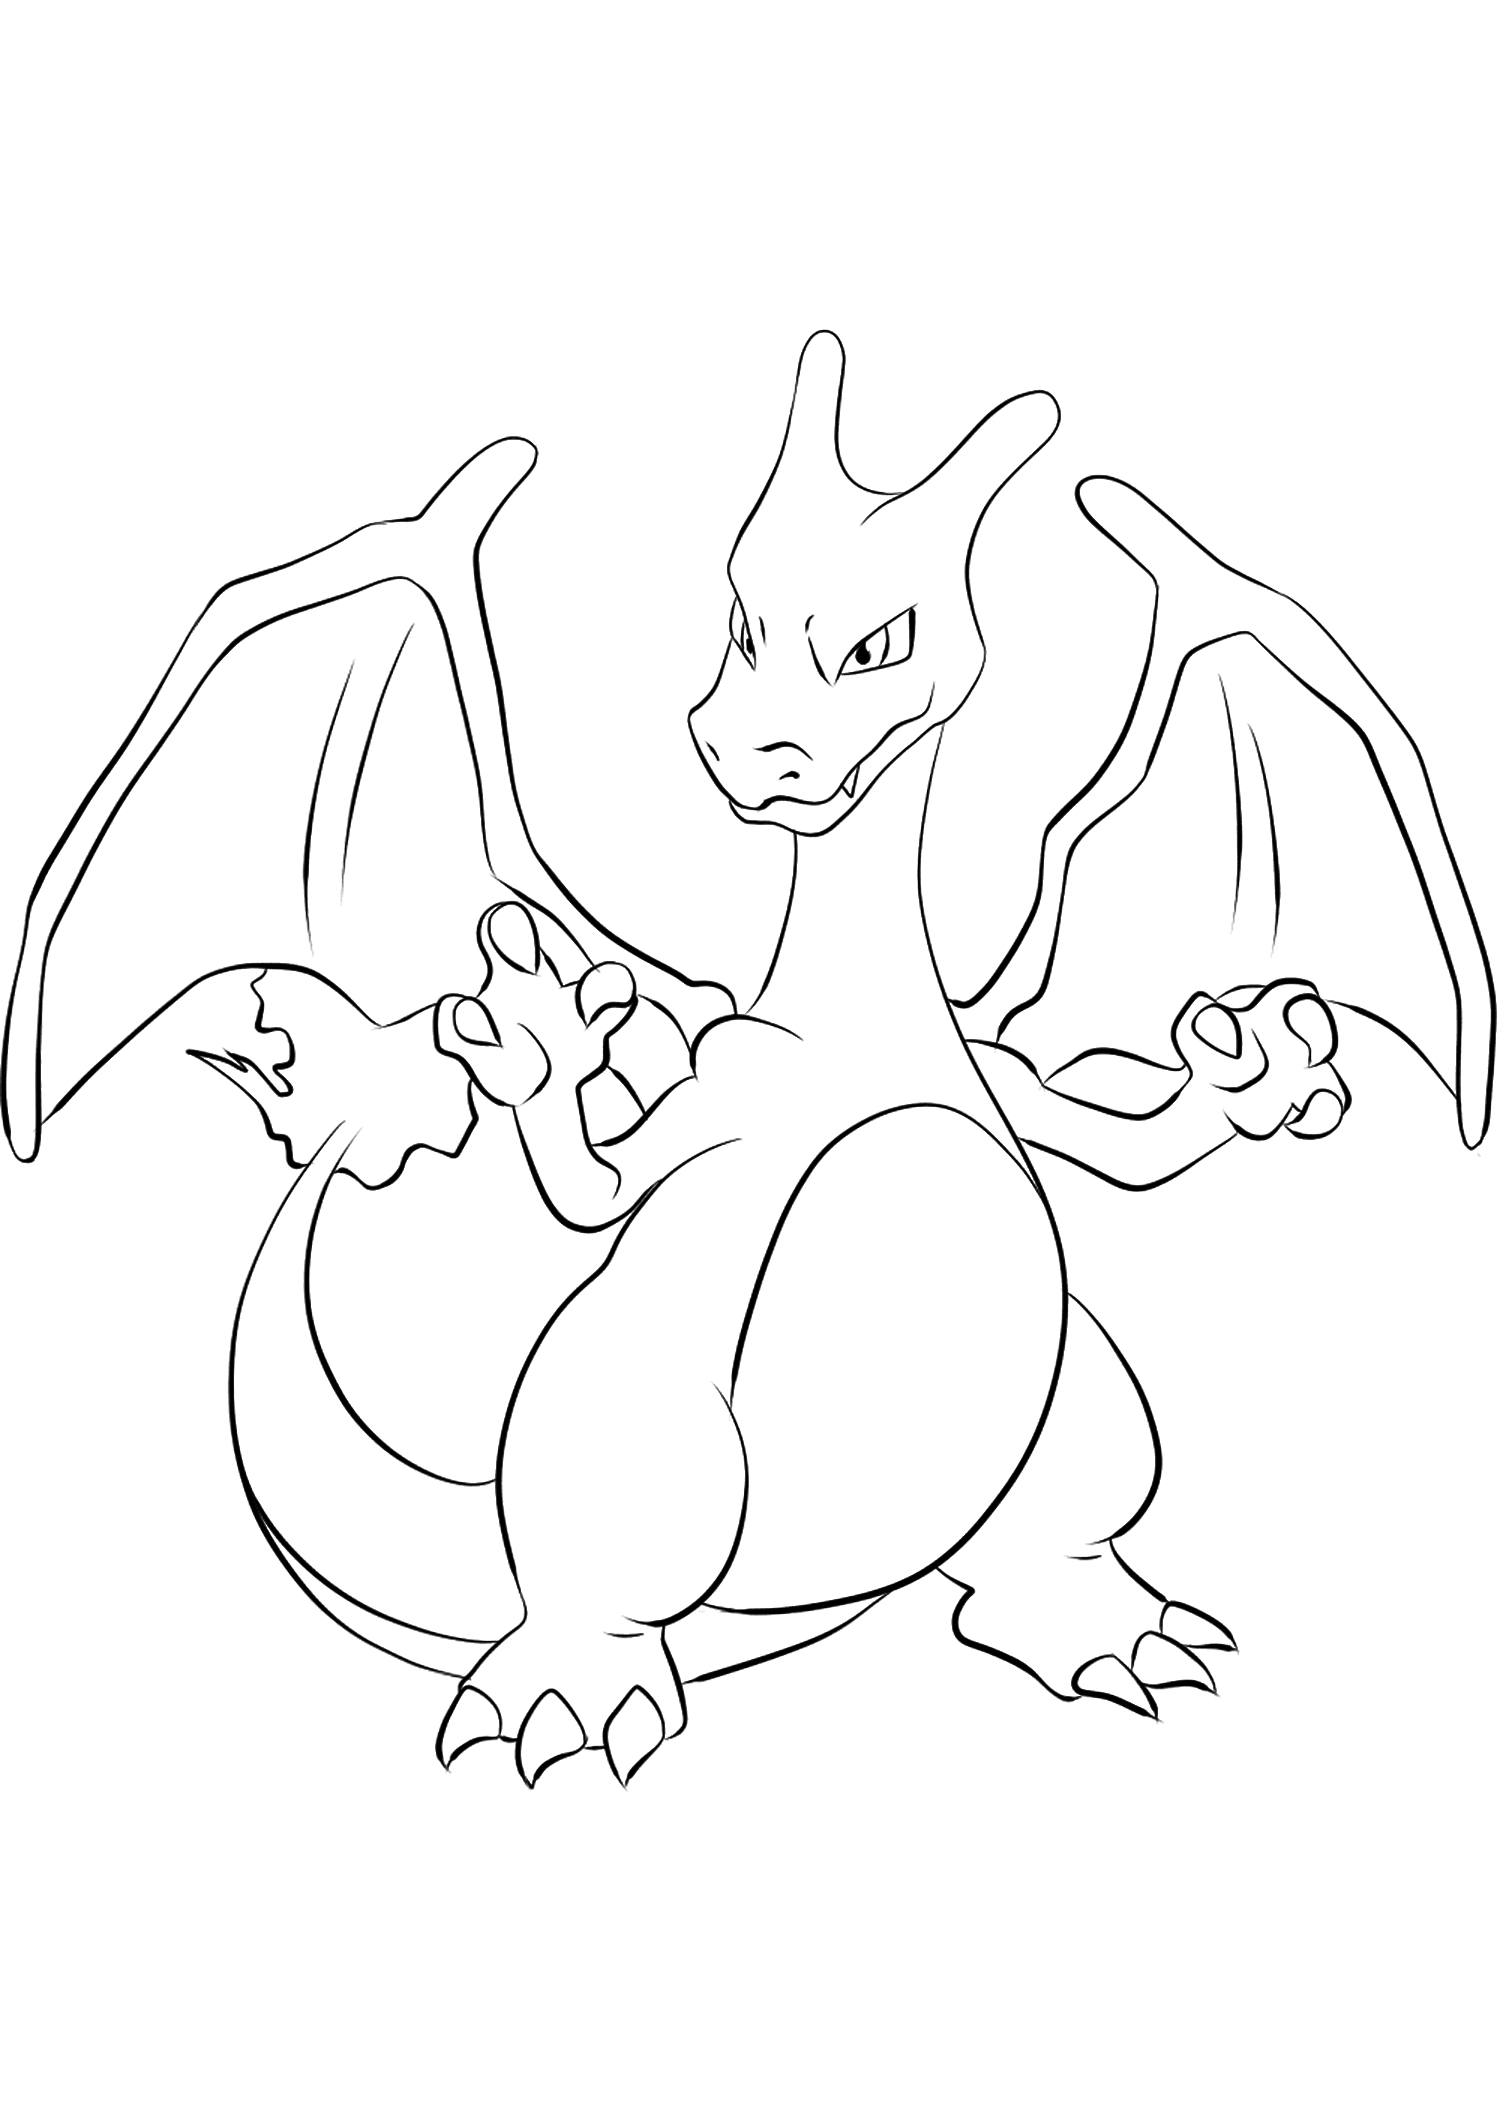 Charizard Coloring Pages Charizard No06 Pokemon Generation I All Pokemon Coloring Pages